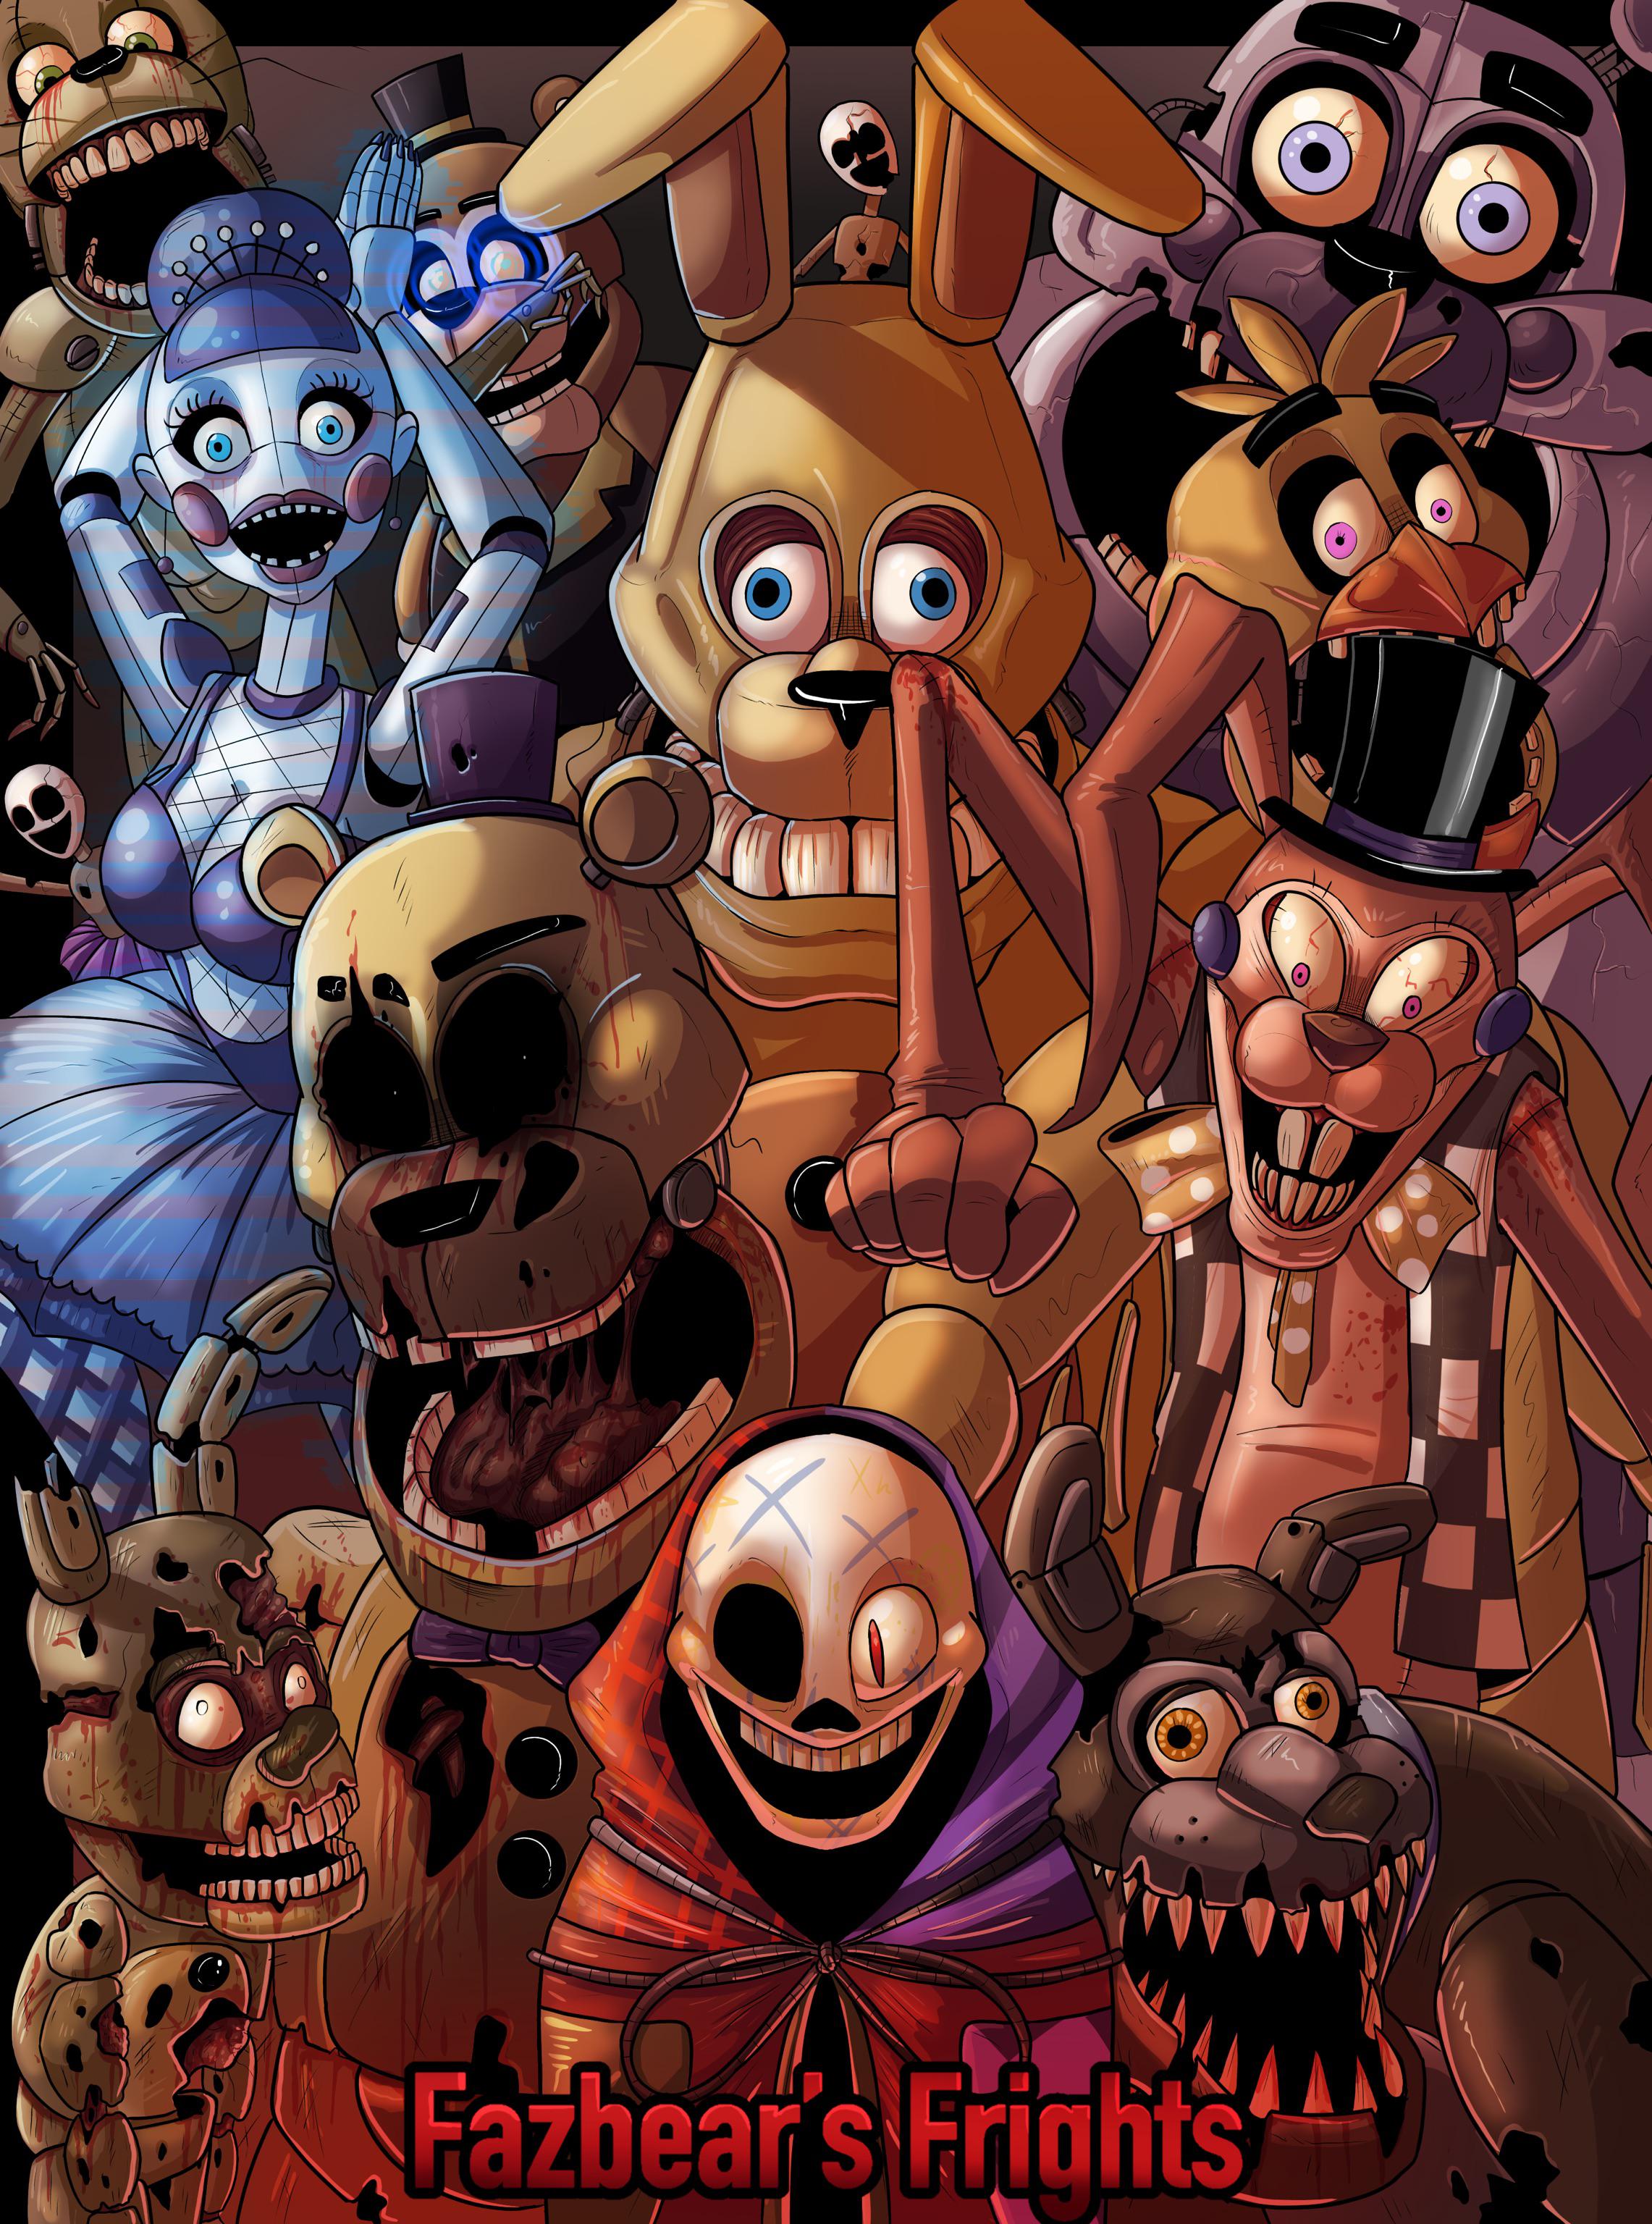 Fazbear's Frights collection” fan cover